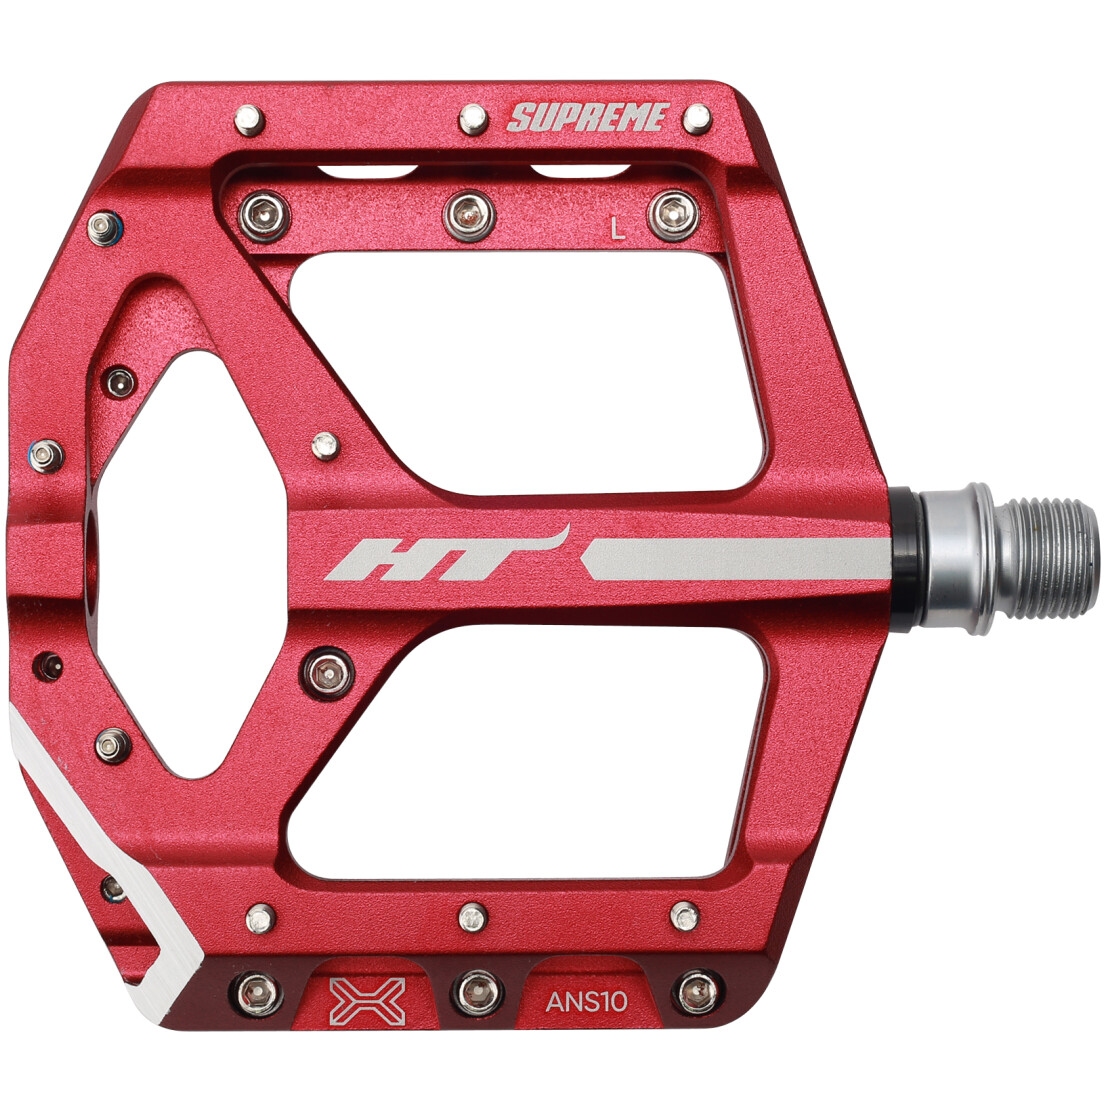 Image of HT ANS10 Supreme Flat Pedal - red